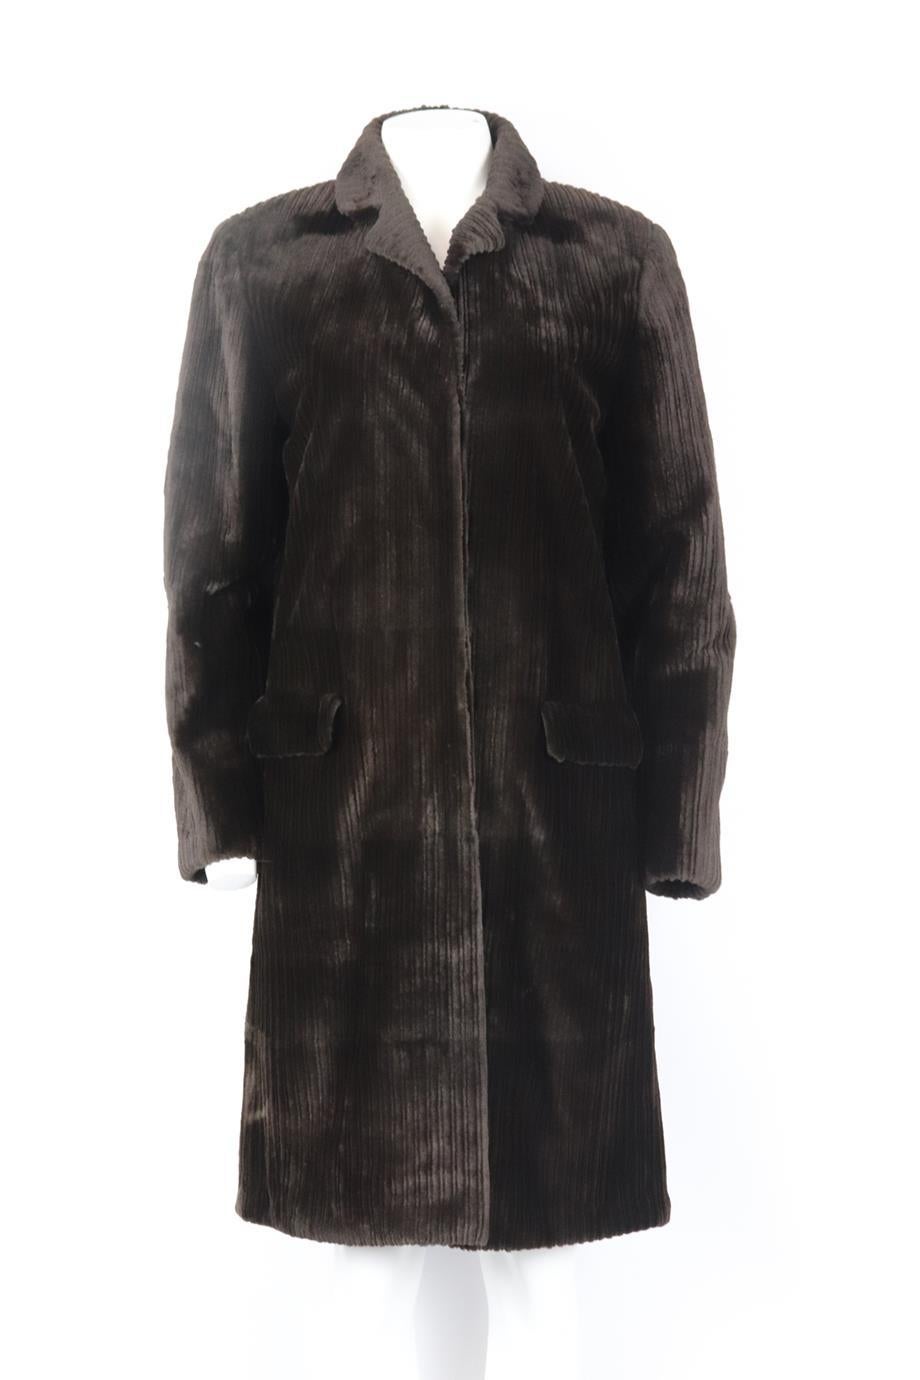 J. Mendel sheared mink fur coat. Brown. Long sleeve, v-neck. Button fastening at front. Size: US 8 (UK 12, FR 40, IT 44). Shoulder to shoulder: 15 in. Bust: 36 in. Waist: 38 in. Hips: 40 in. Length: 39 in. Very good condition - Composition label cut